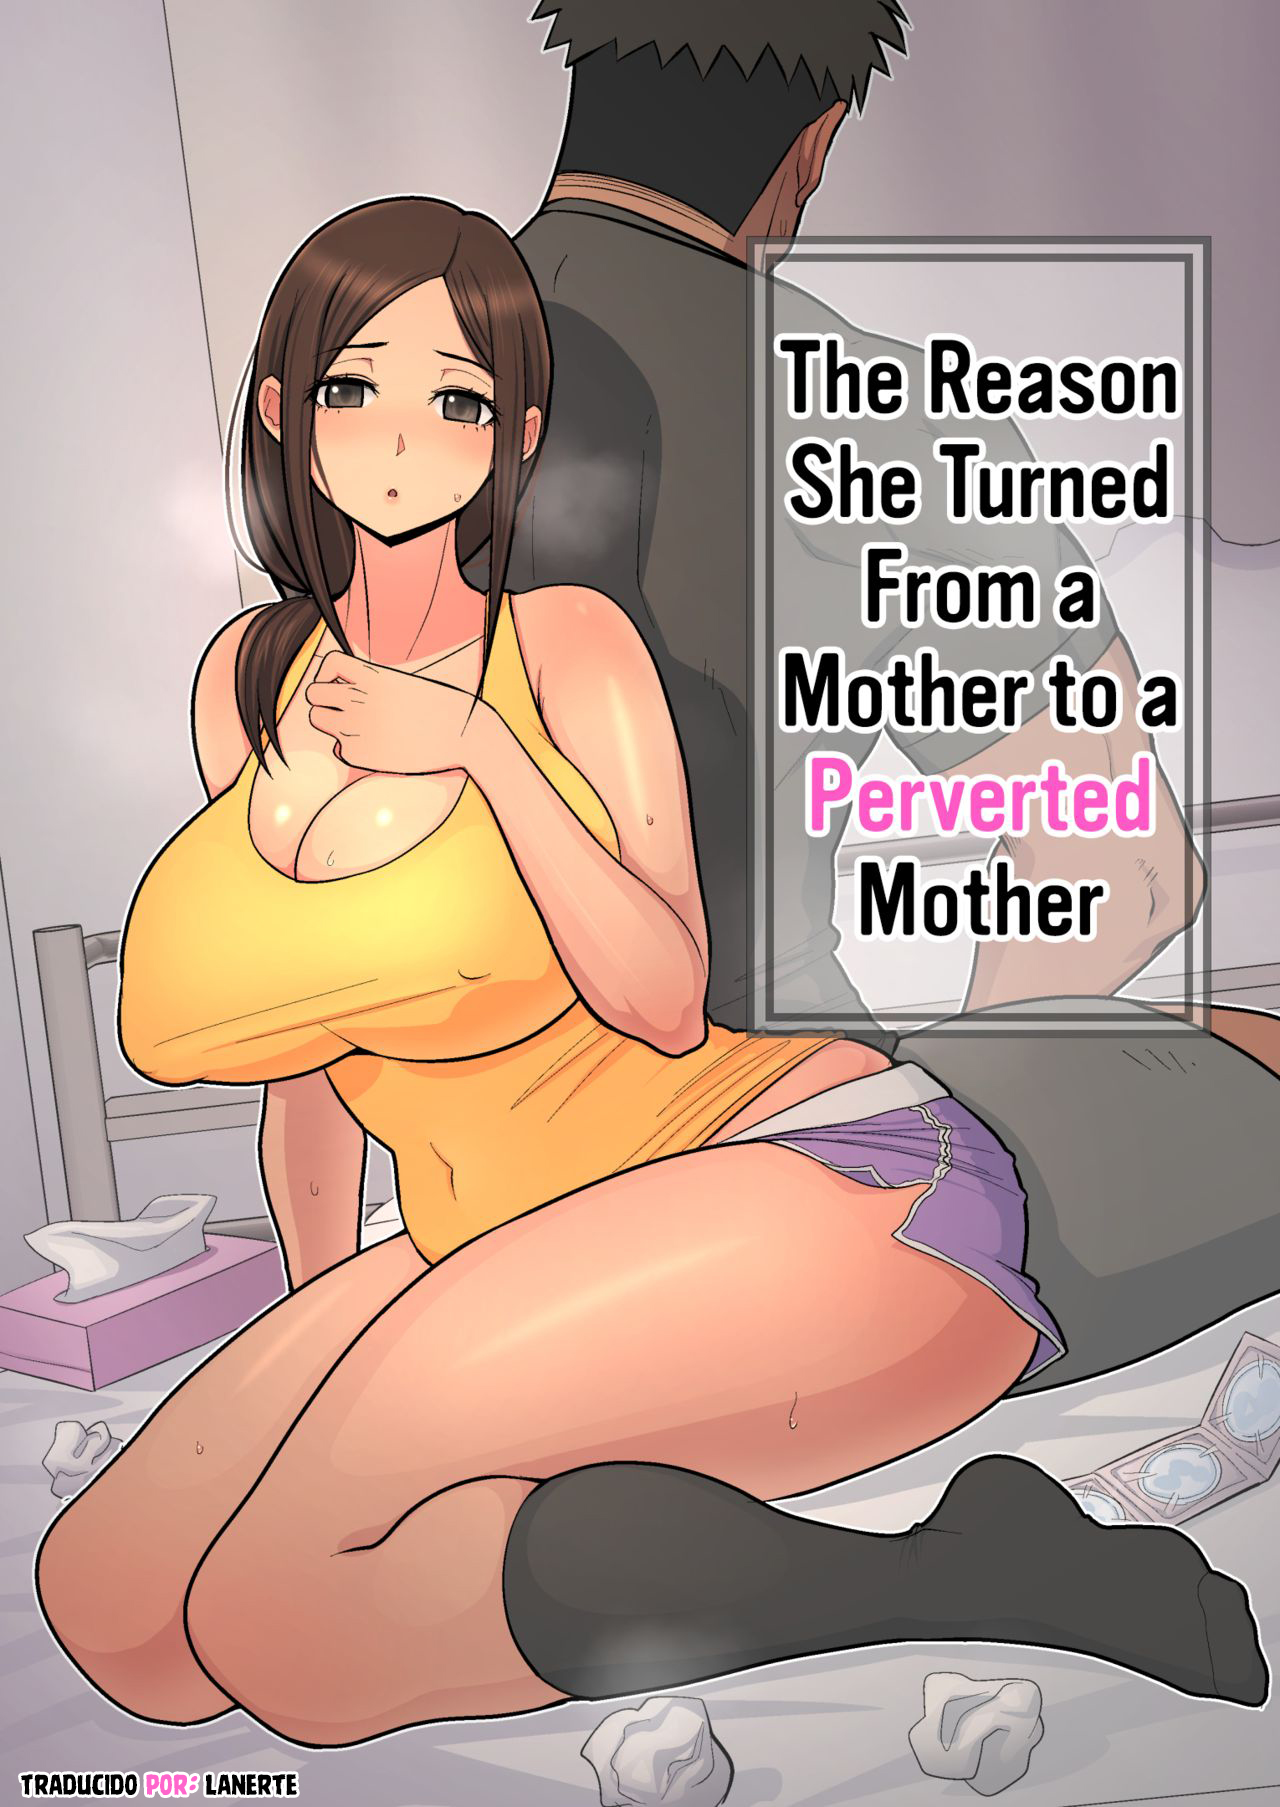 The Reason She Turned From a Mother to a Perverted Mother - 44c865262f37871936783ffcd5c2eb1c